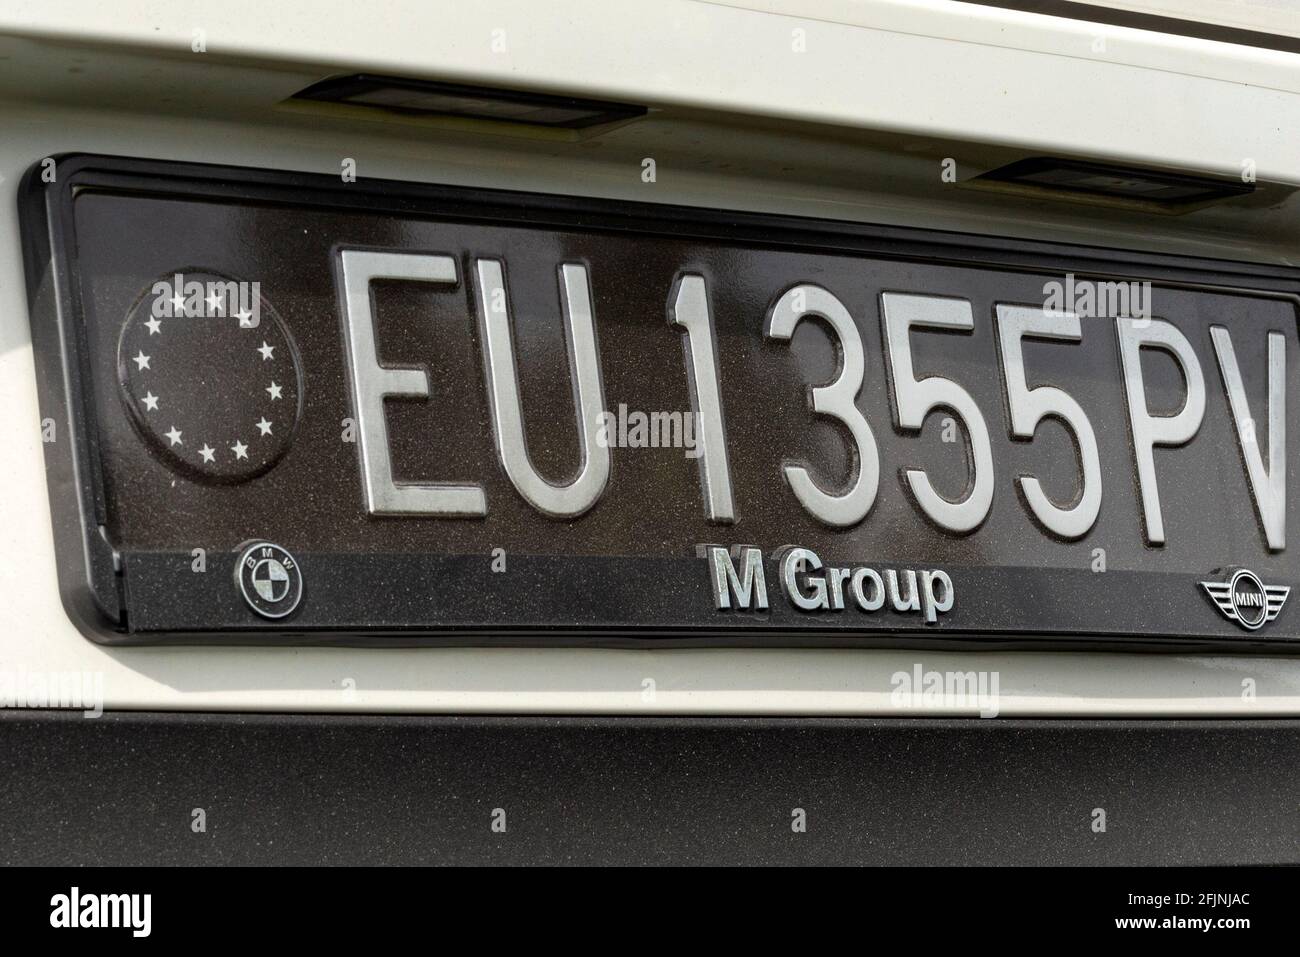 M Group BMW Mini branded specialized uncommon car number plate with the European Union logo Stock Photo